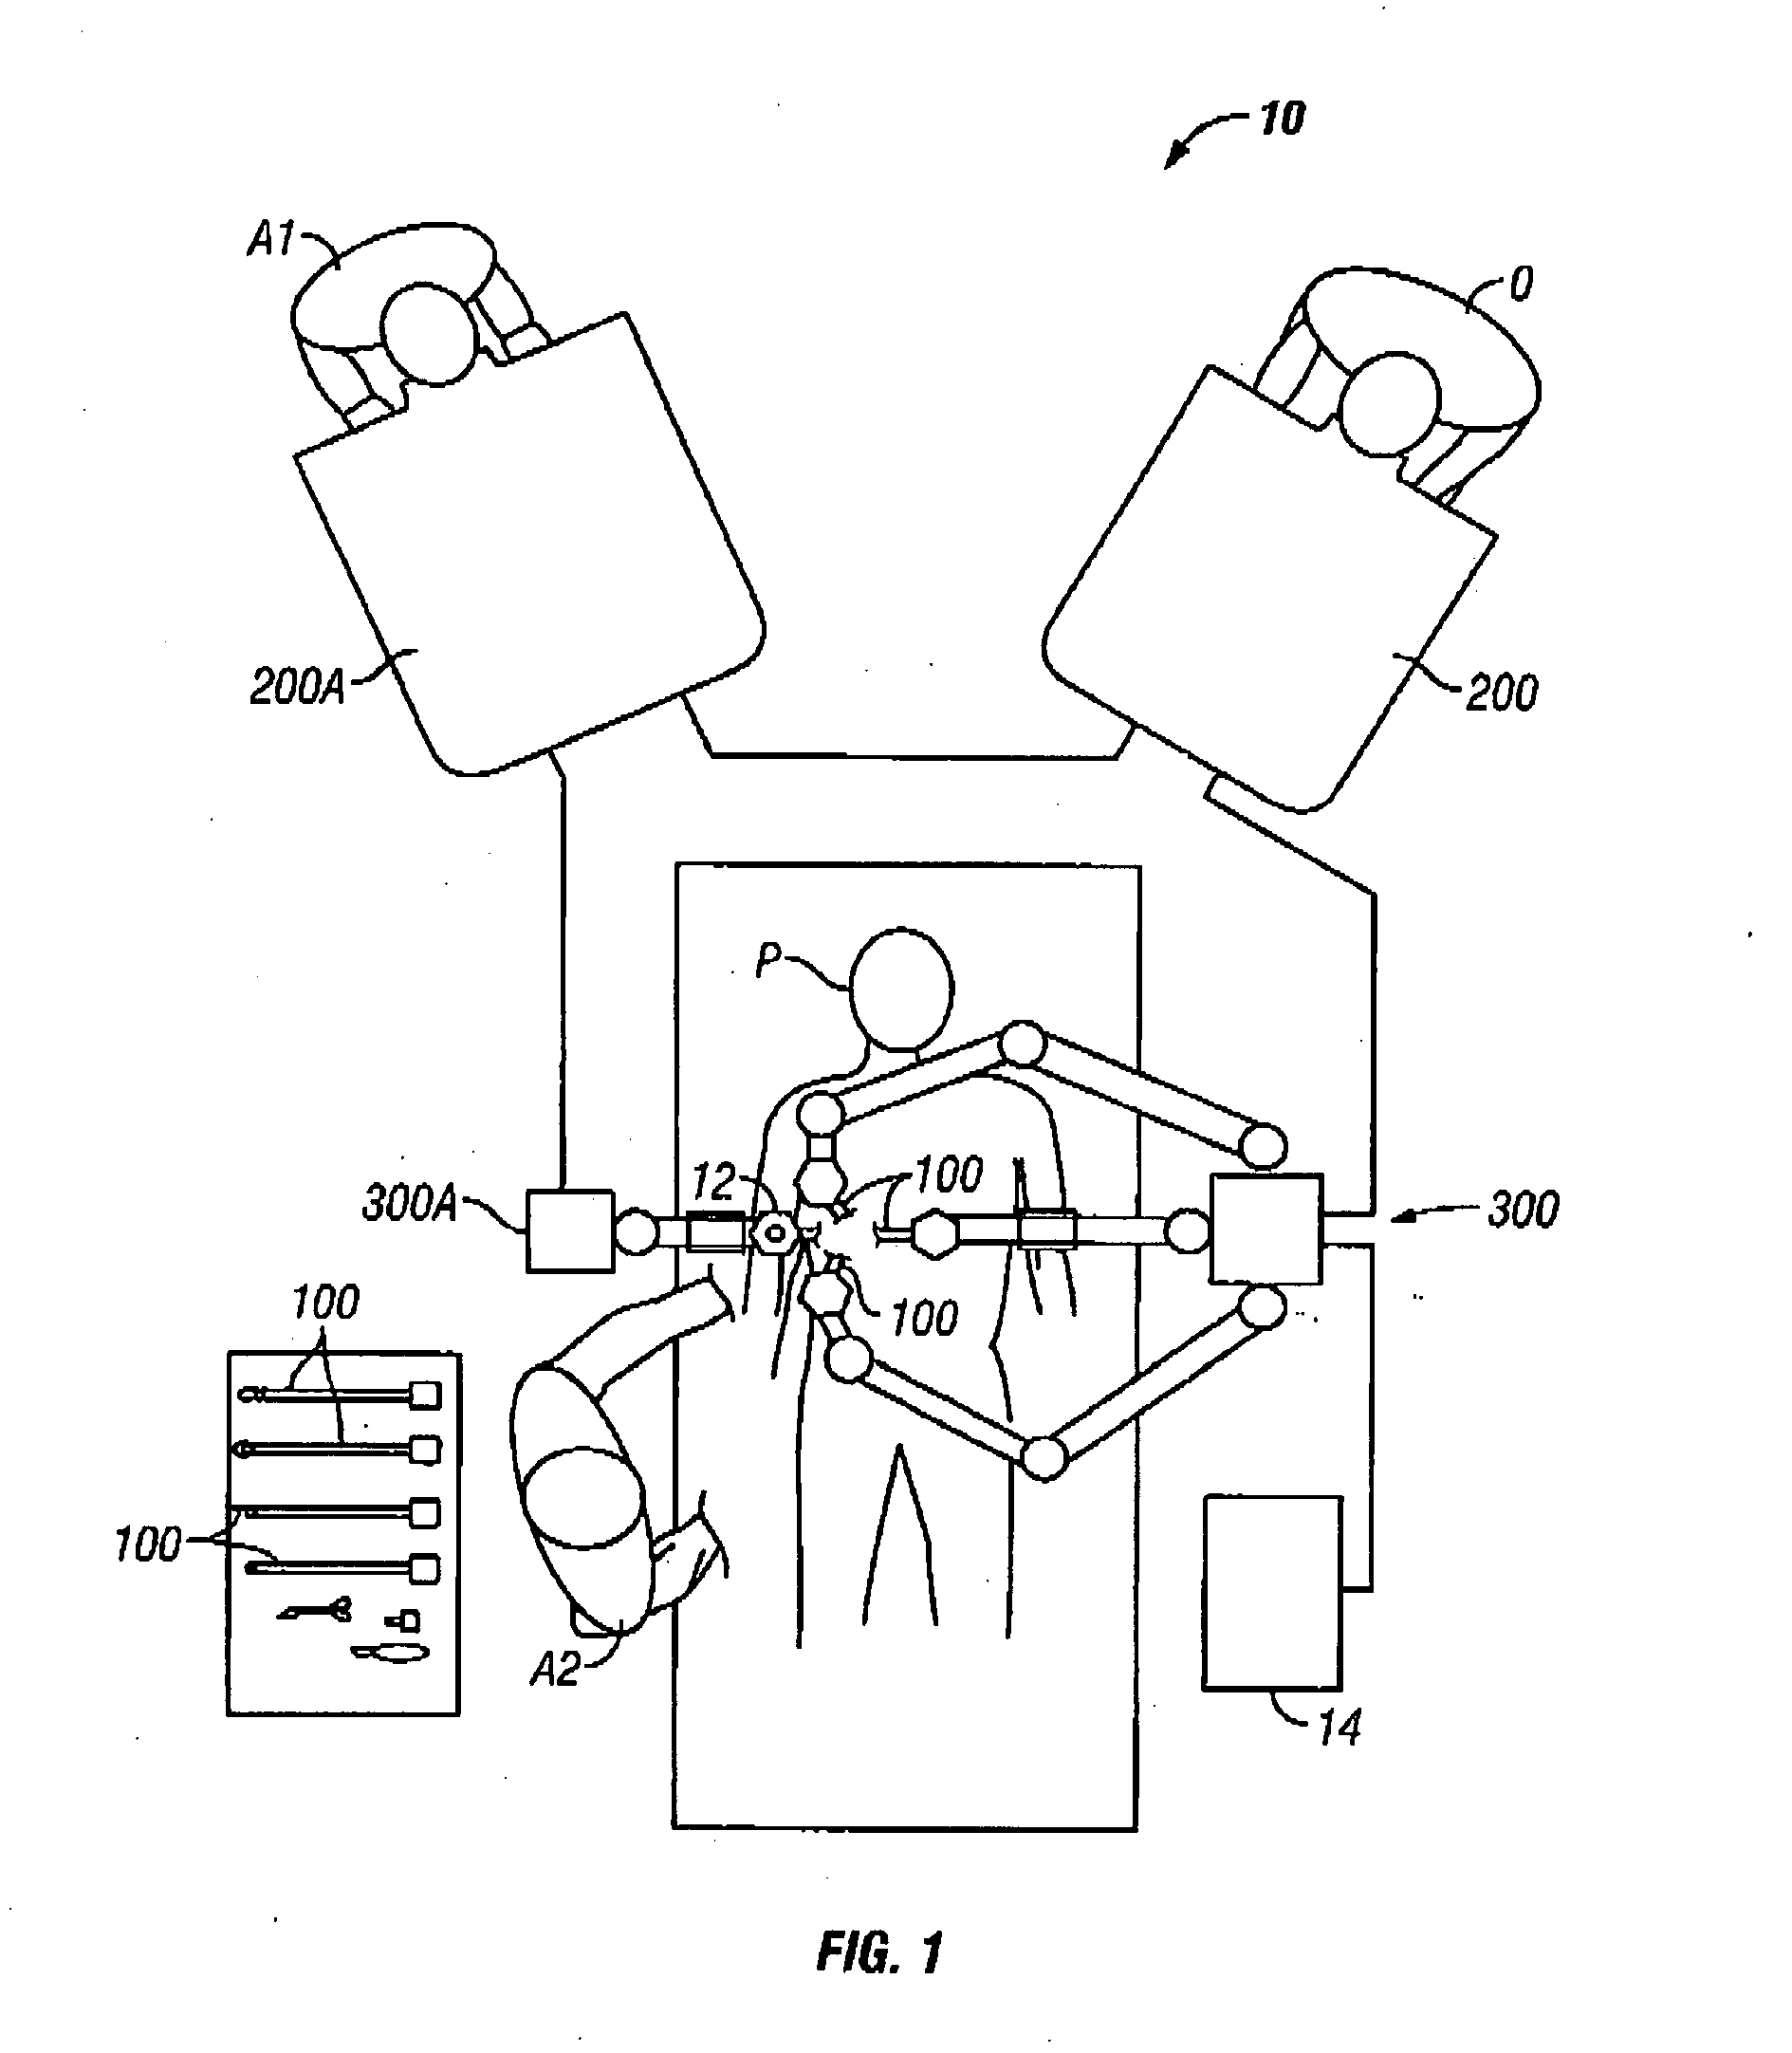 Methods and apparatus for surgical planning